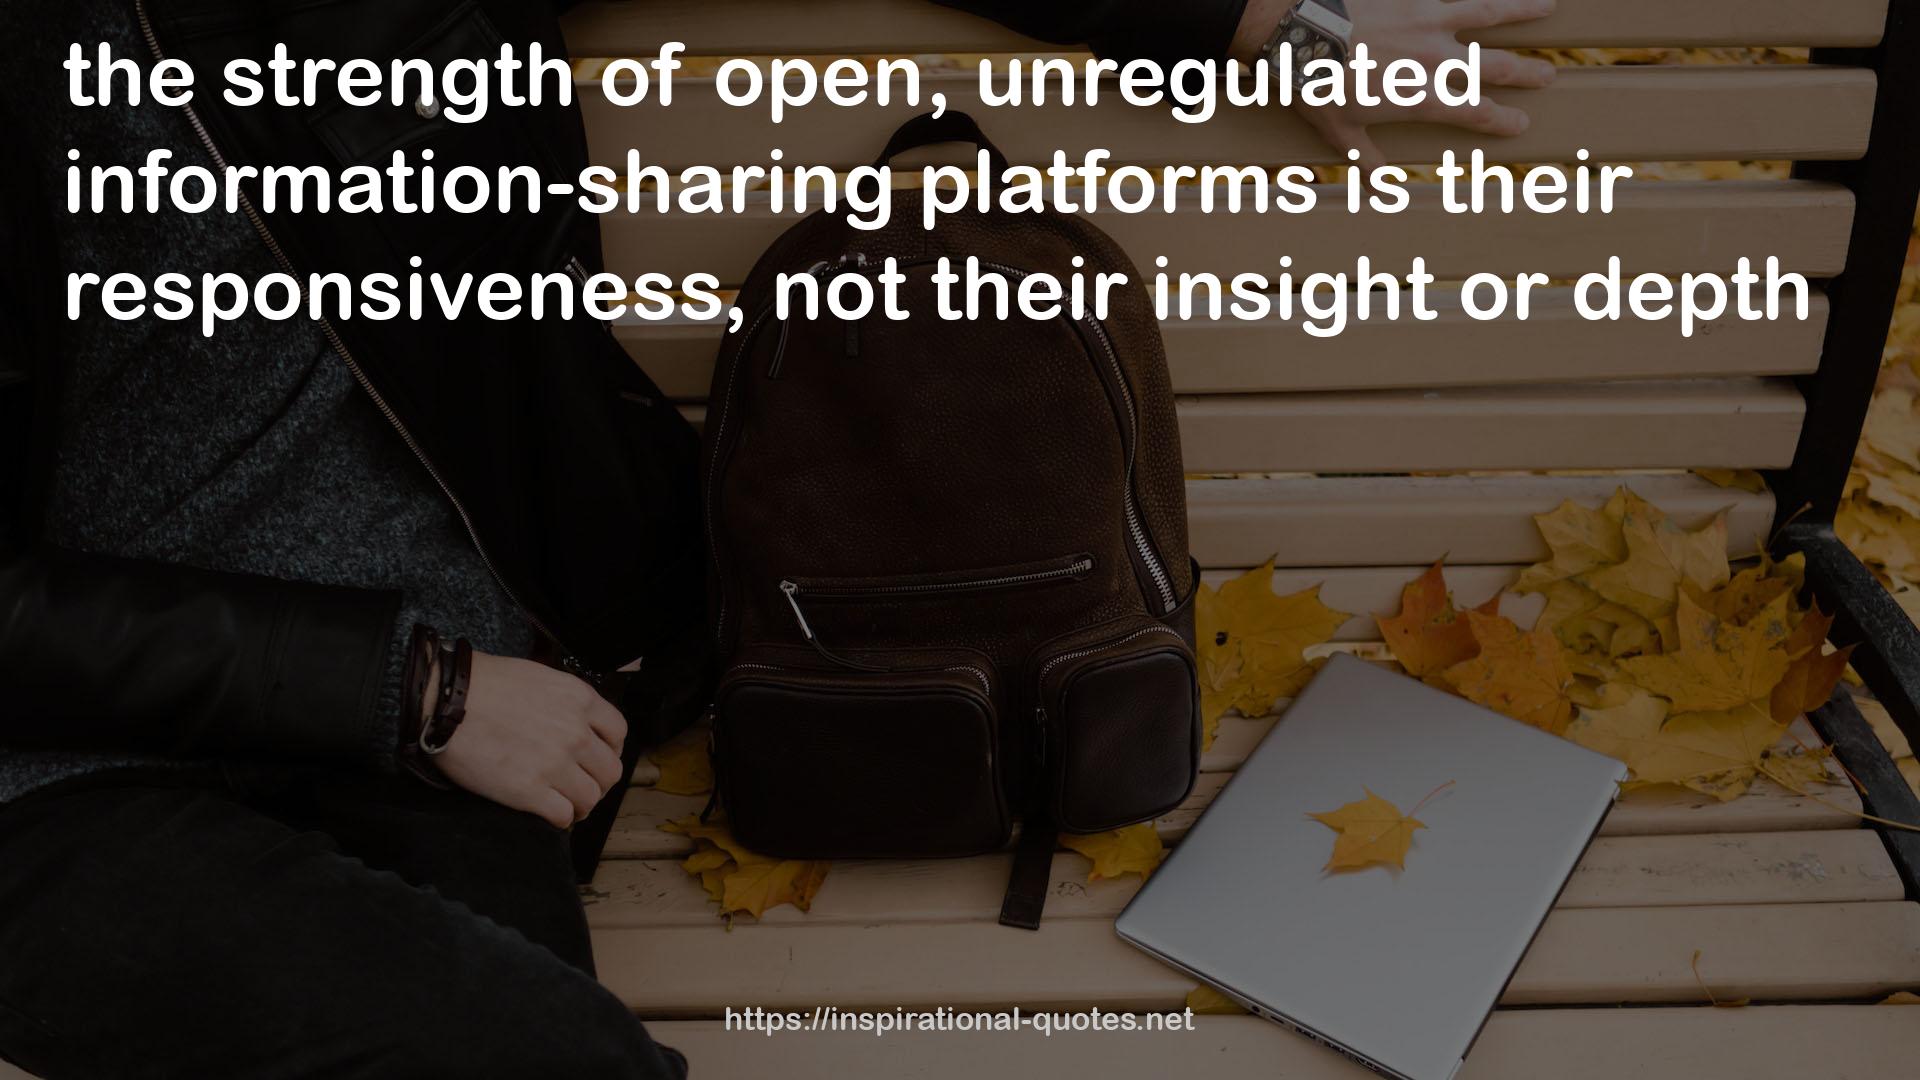 open, unregulated information-sharing platforms  QUOTES